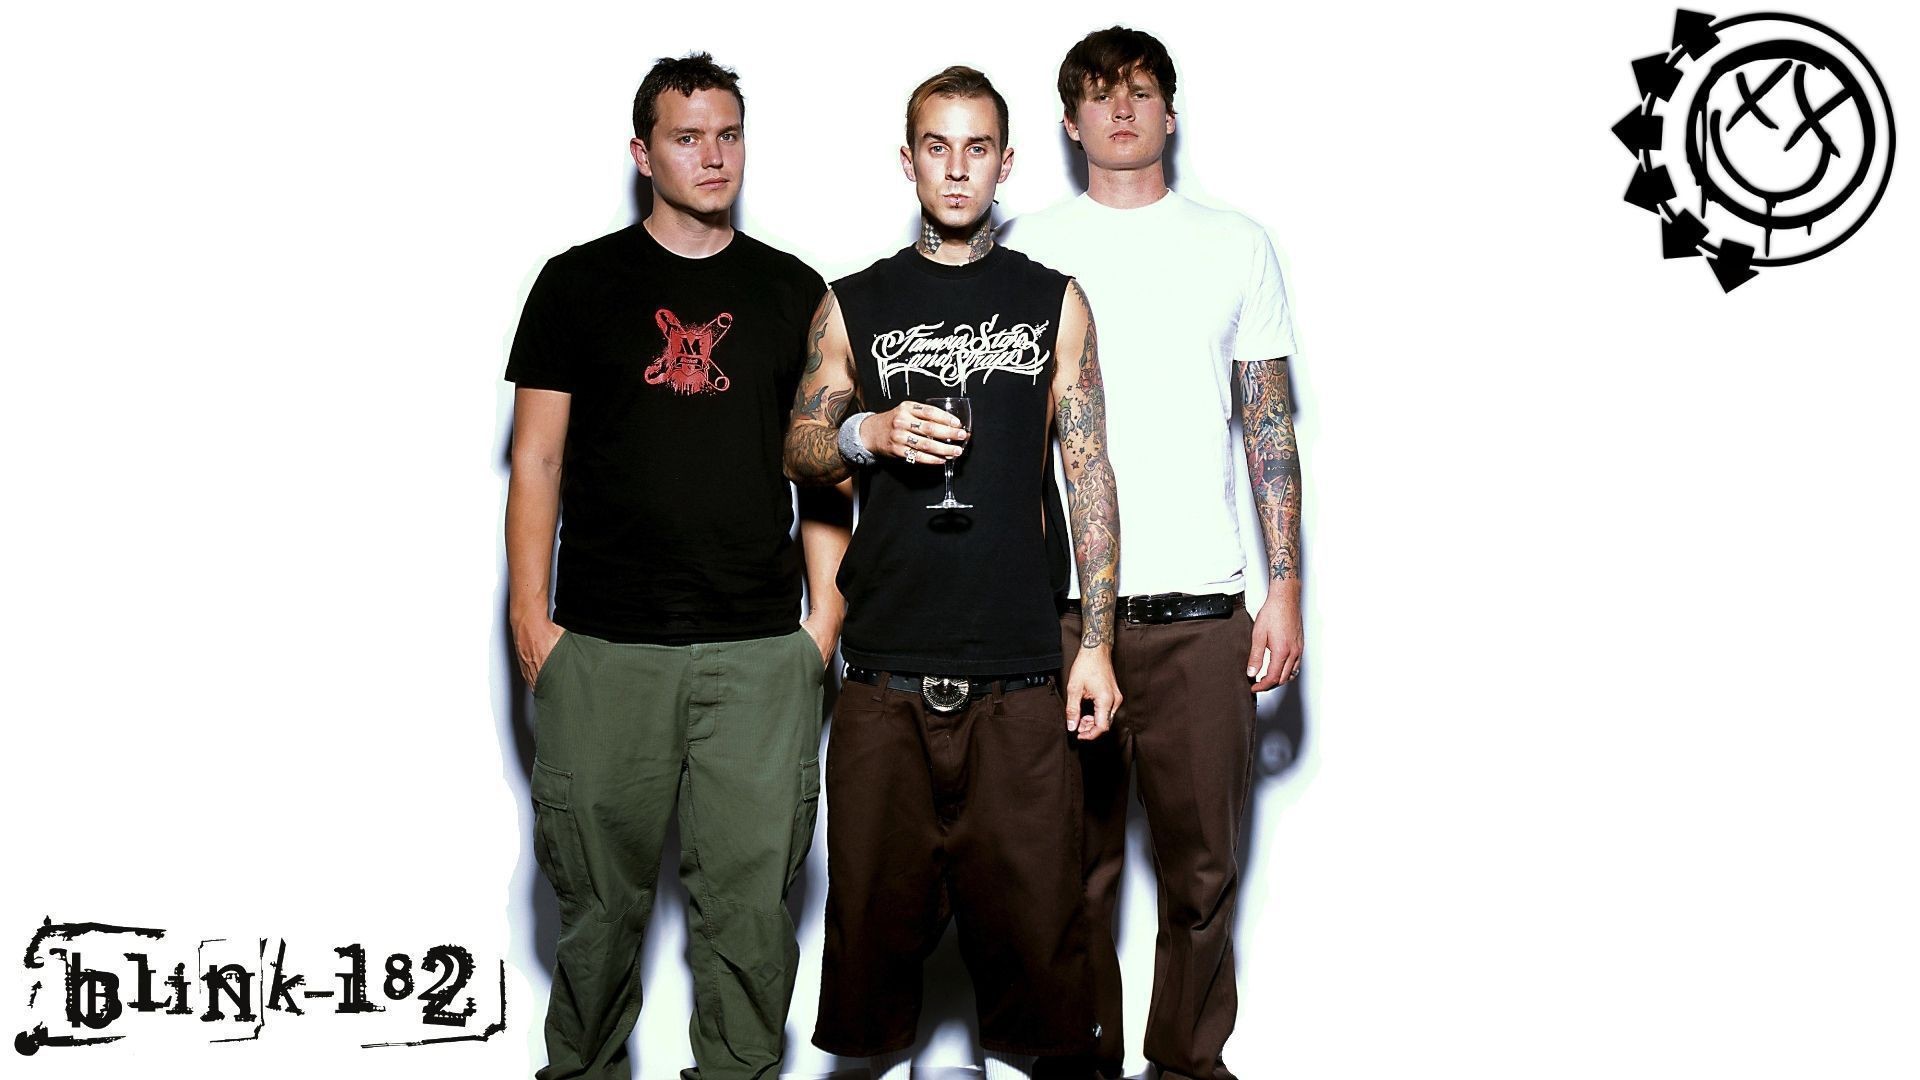 1920x1080 ... Blink 182 High Quality Wallpapers ...